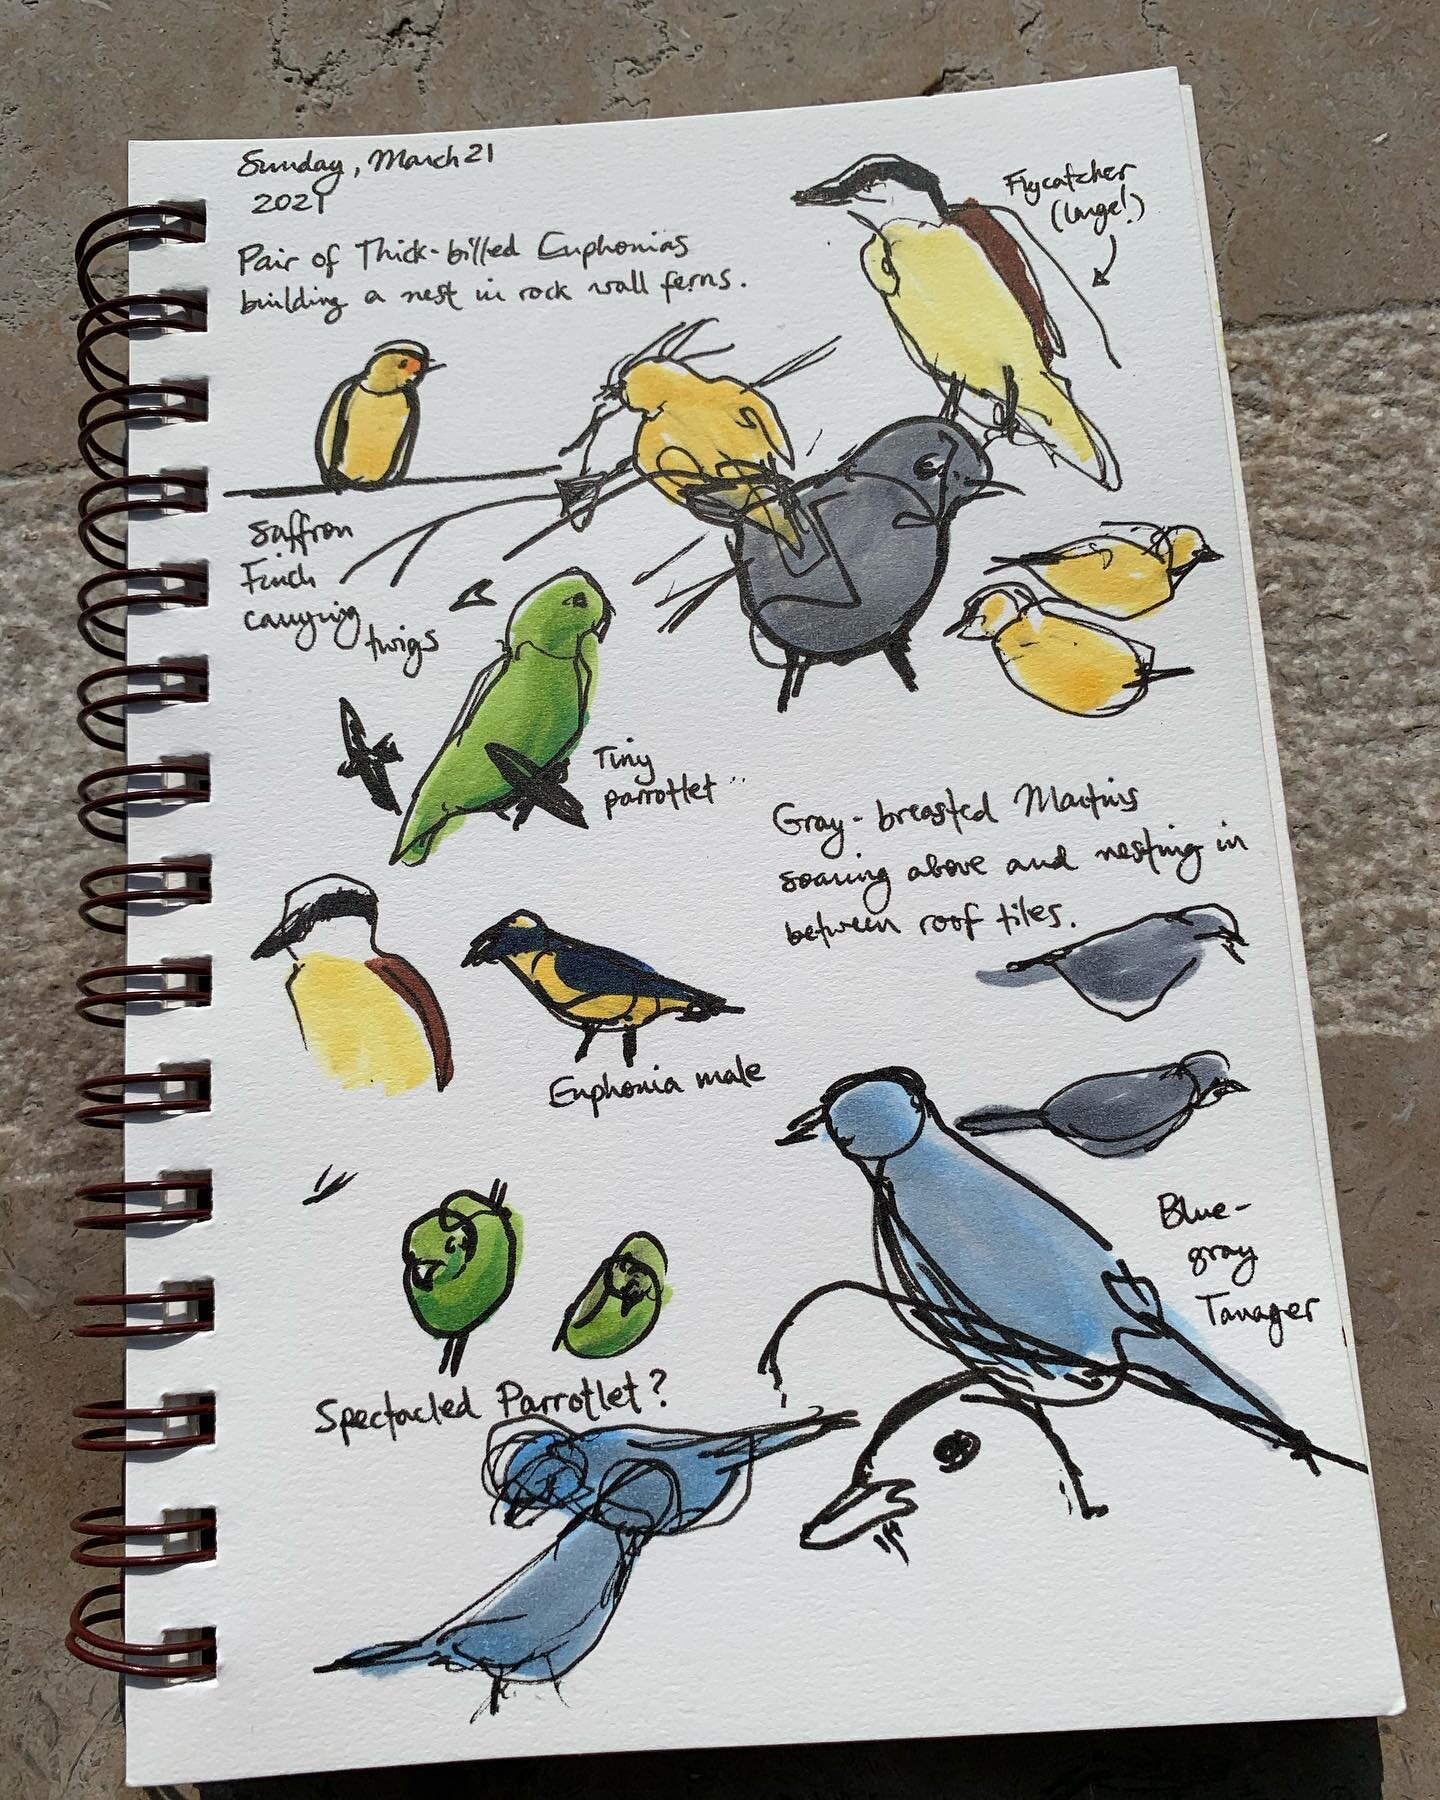 Quick-capture drawings of birds this morning
.
.
.
.
.
.
#birds #bird #birdwatching #sketching #quickcapture #gesture #gestural #loosesketch #observationaldrawing #pigmamicron #sakura #copic #copicmarkers #sketchbook #naturejournal #colombia #tropica